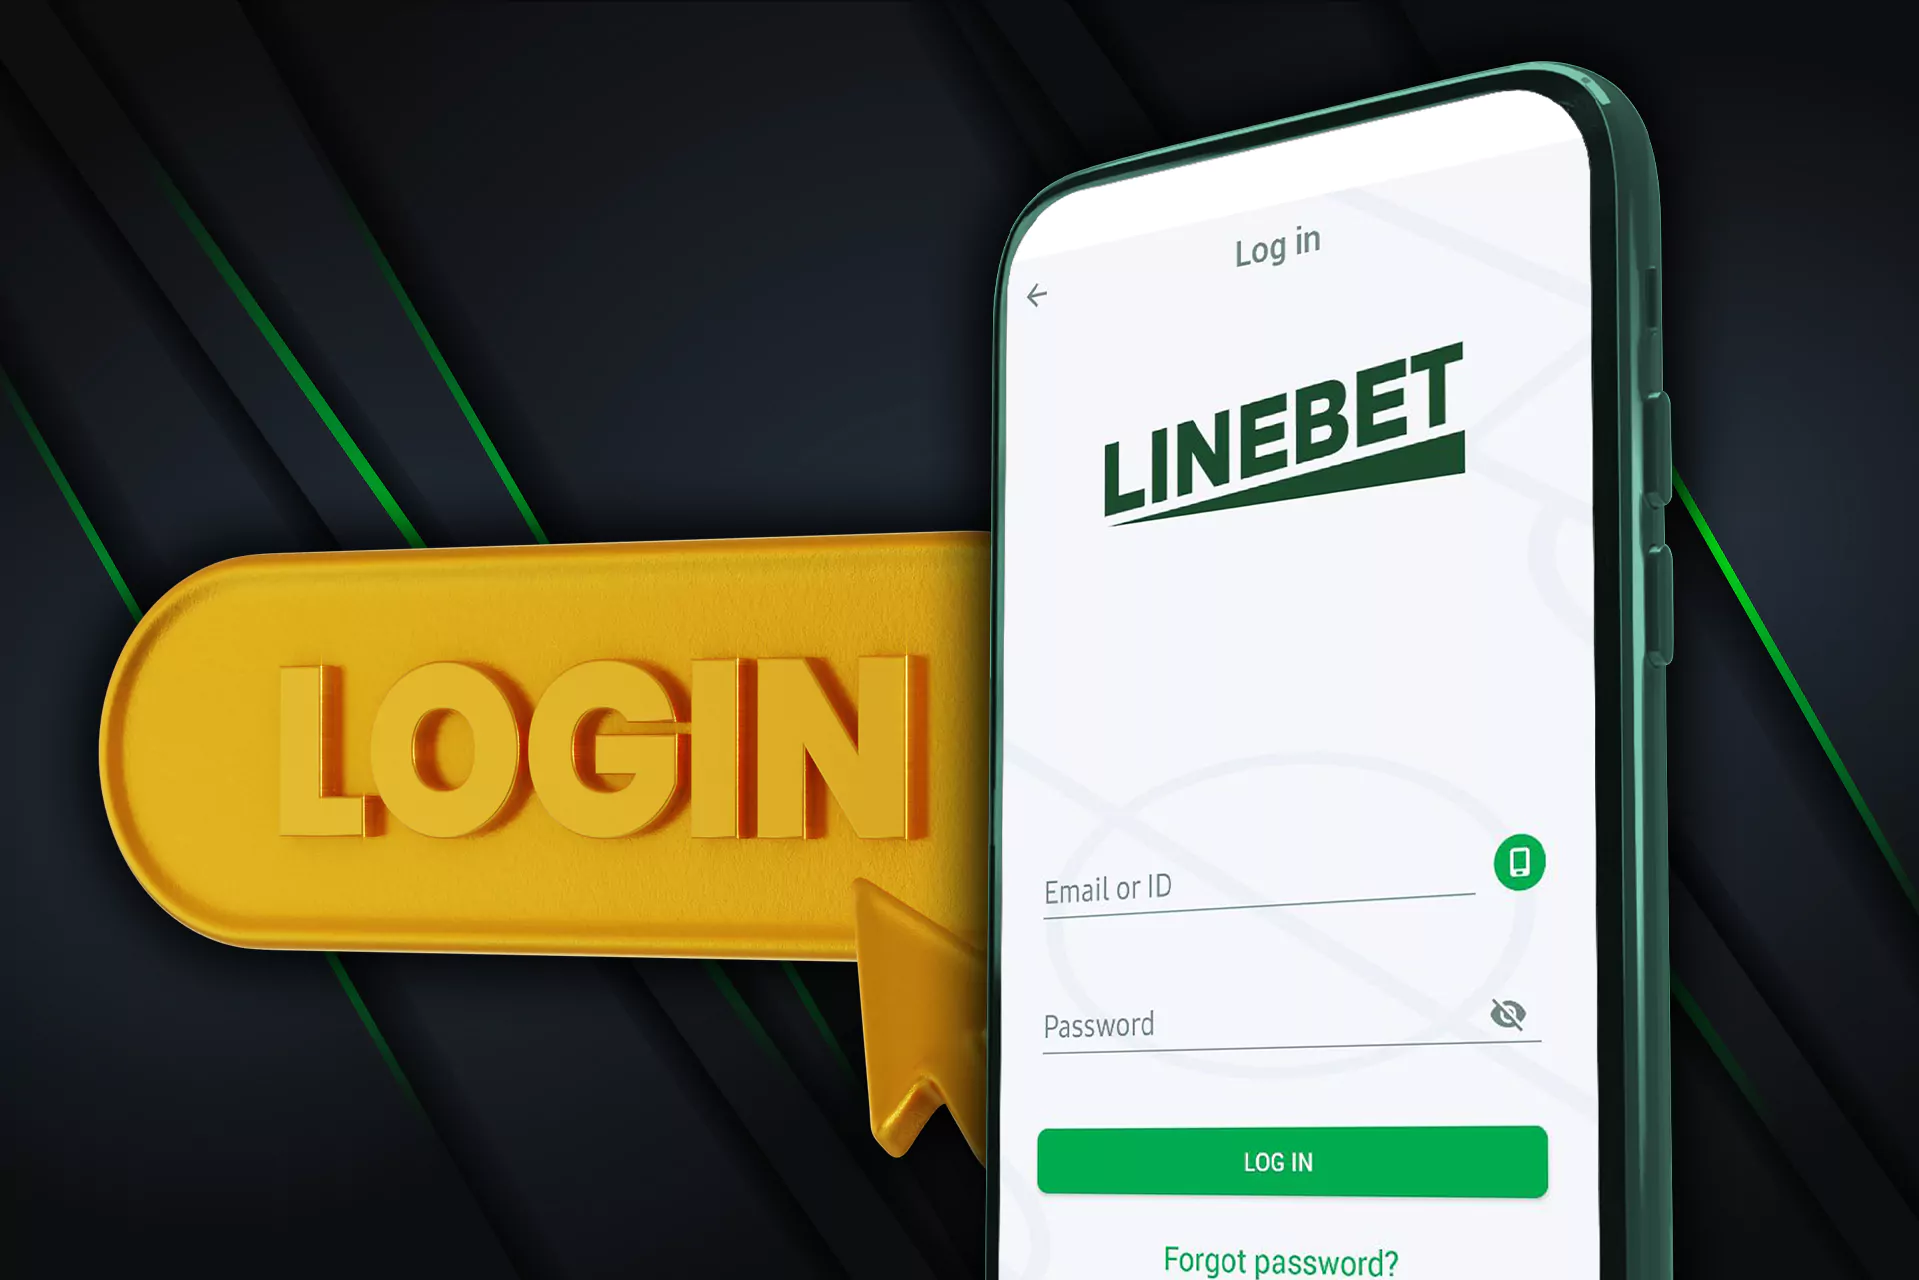 Enter the password and a username and log in to Linebet Mobile App.